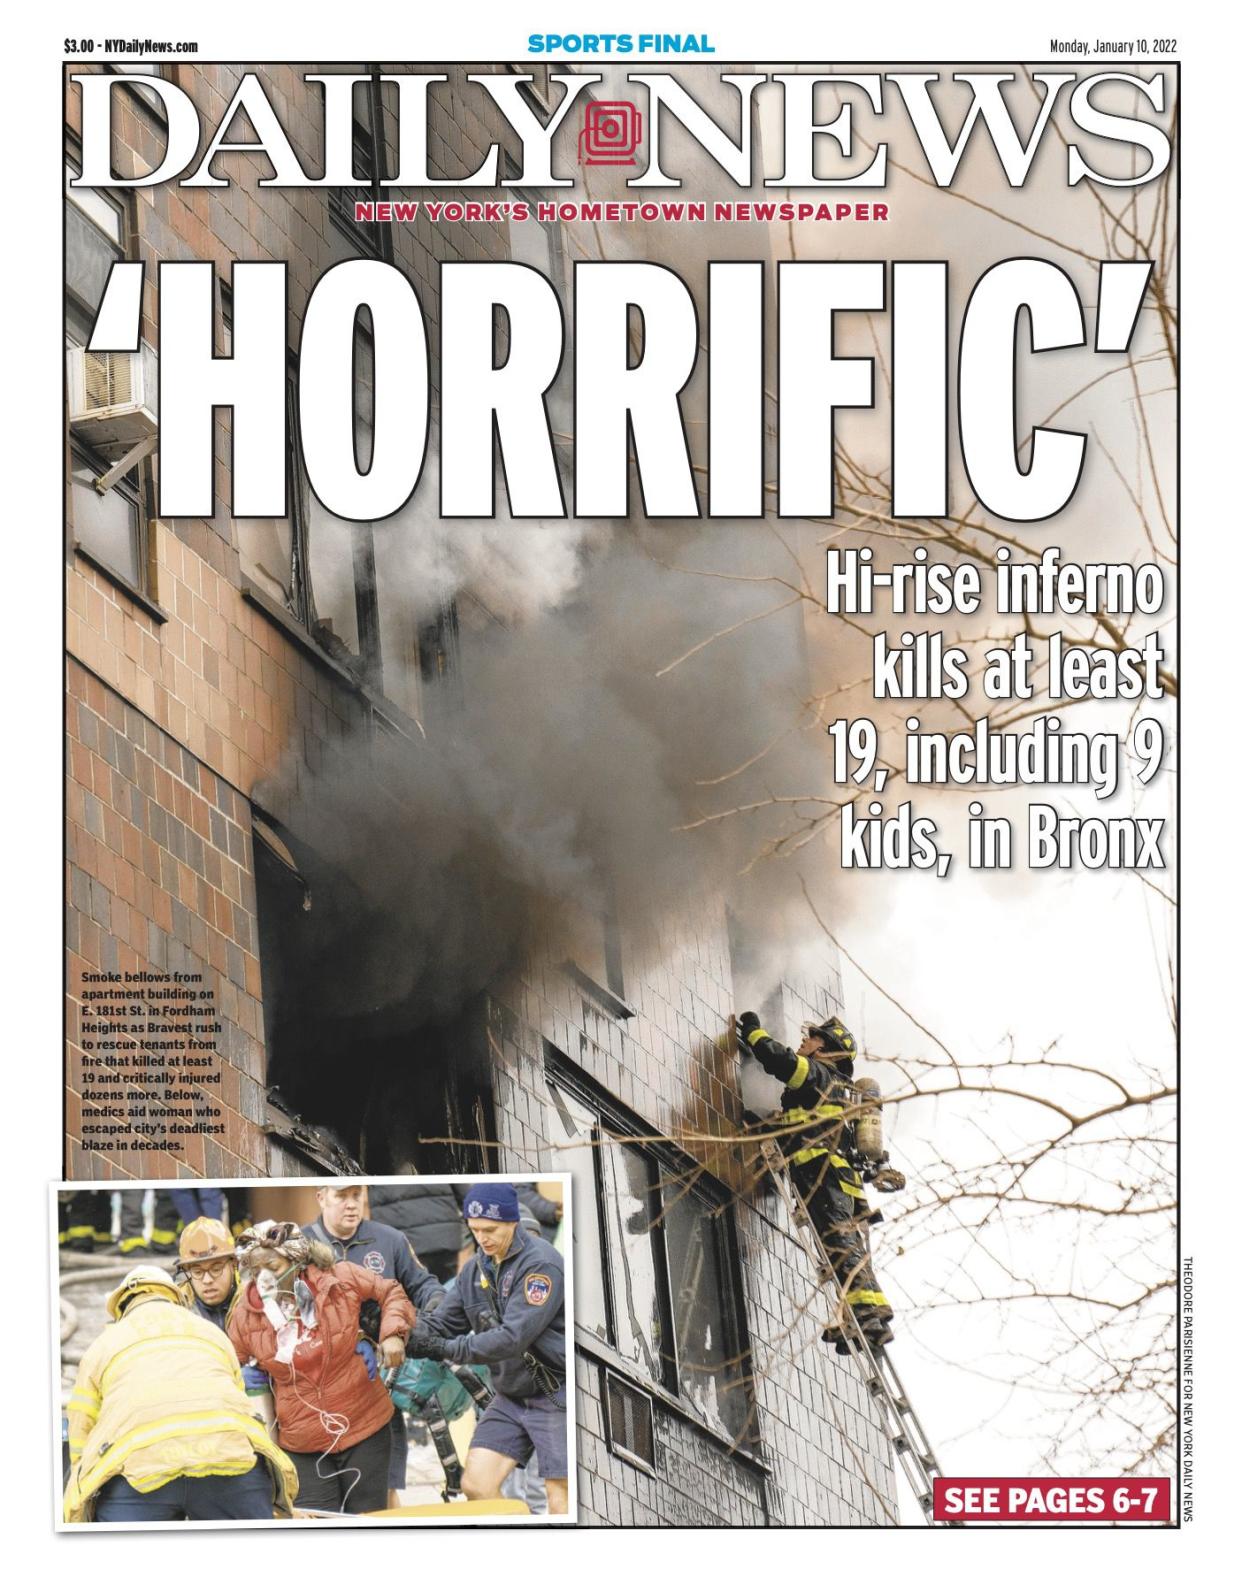 Front page for Jan. 10, 2022: Hi-rise inferno kills at least 19, including 9 kids, in Bronx. Smoke bellows from apartment building on E. 181st St. in Fordham Heights as Bravest rush to rescue tenants from fire that killed at least 19 and critically injured dozens more. Below, medics aid woman who escaped city's deadliest blaze in decades.